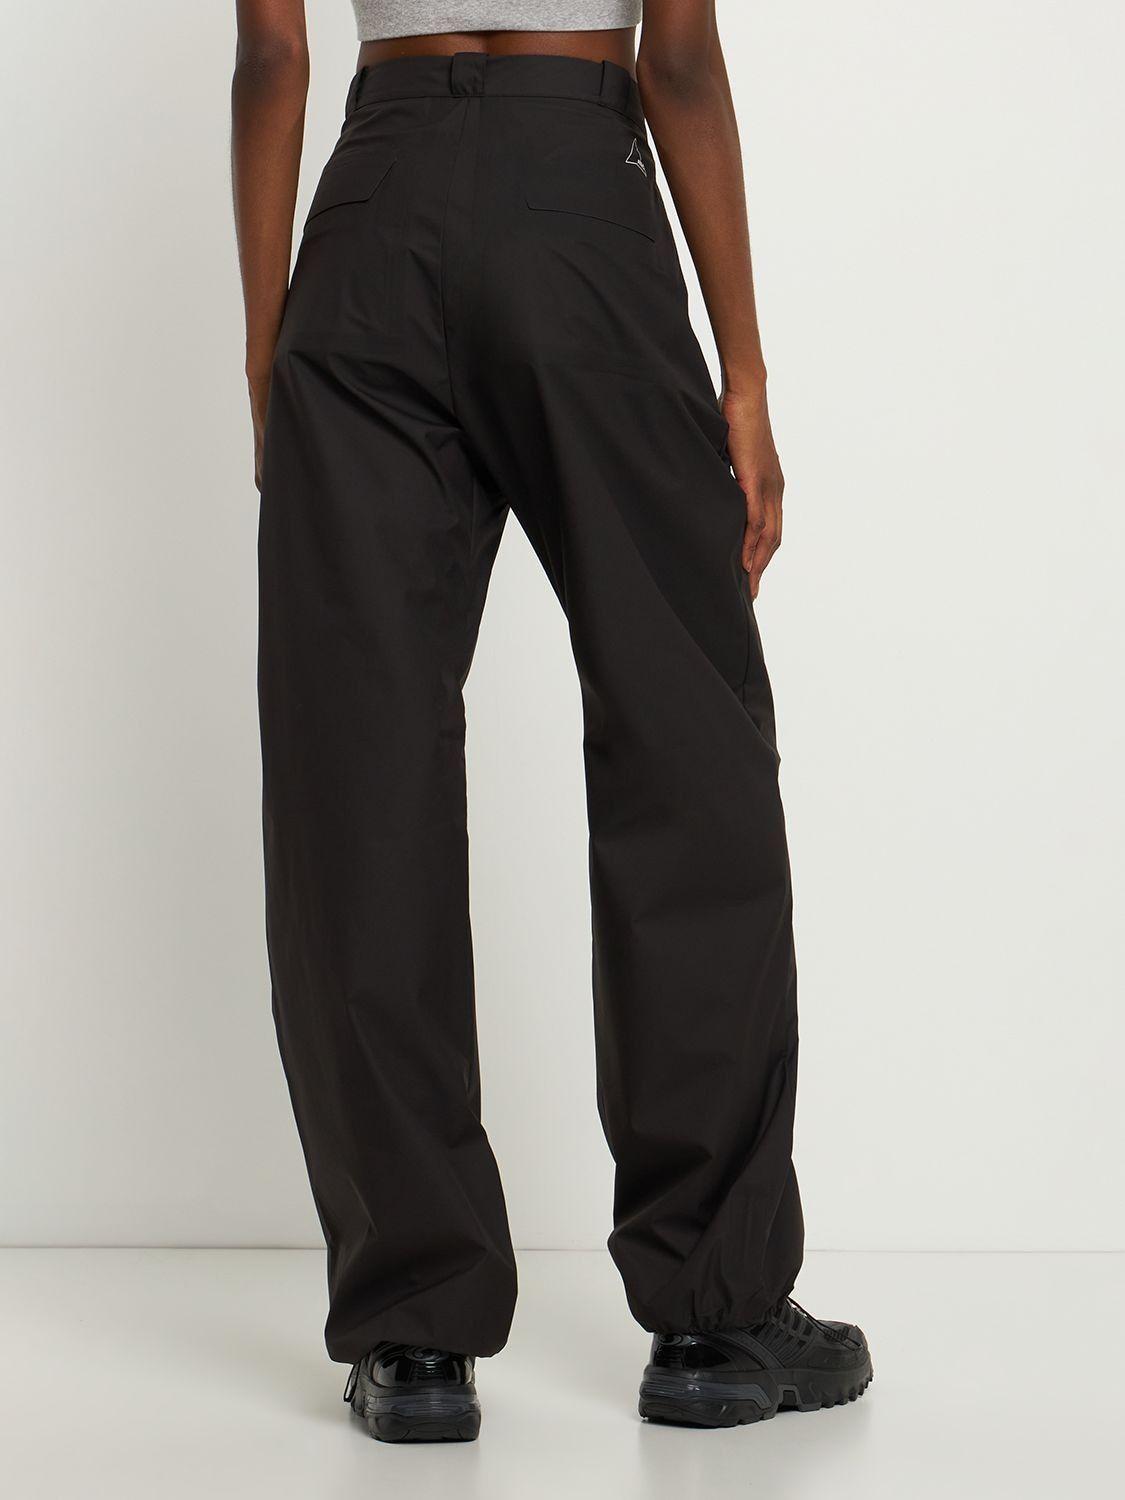 Roa Oversize Chino Pants in Black | Lyst